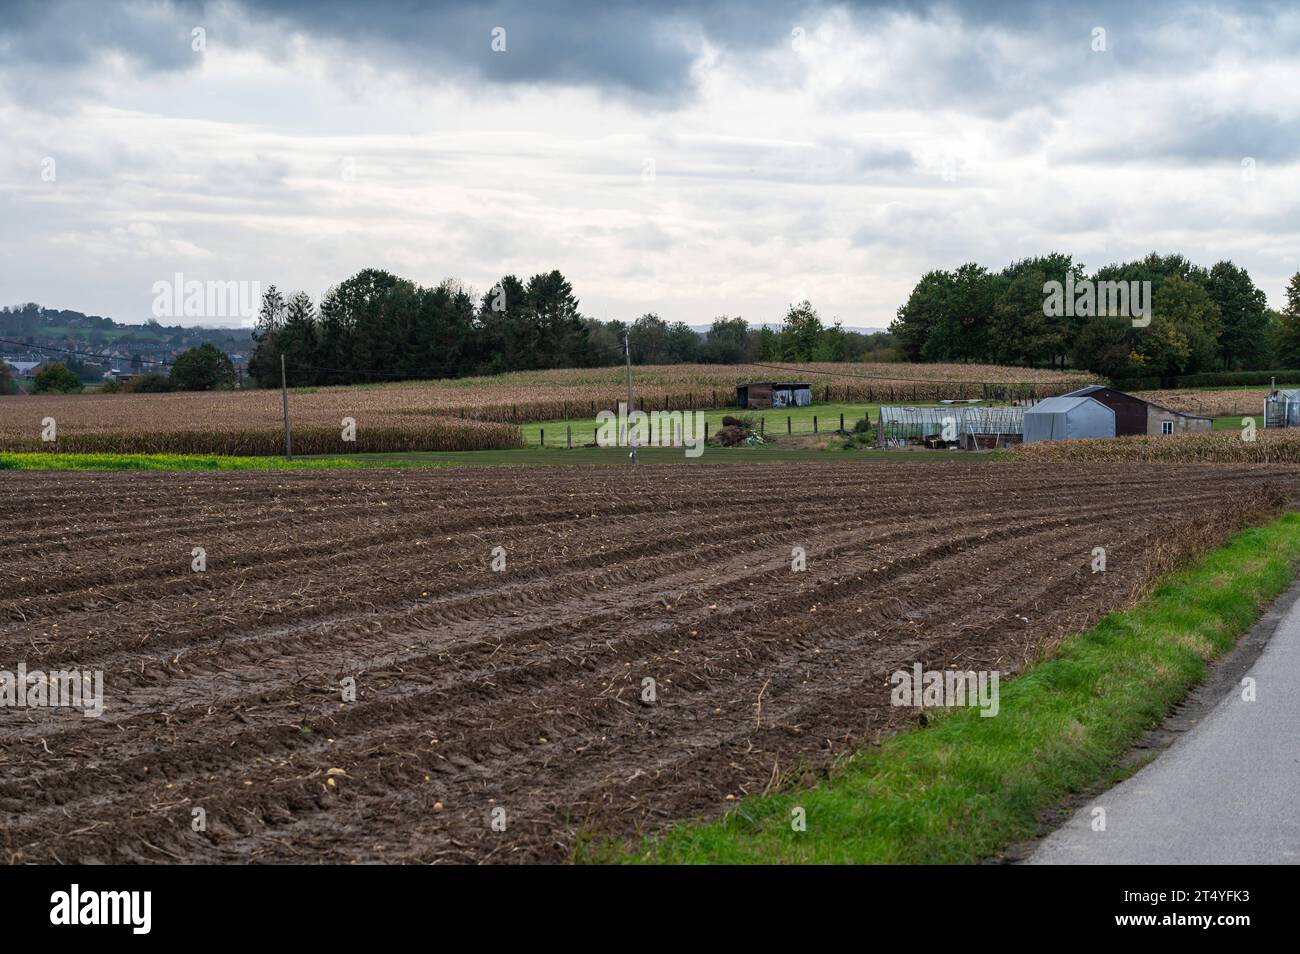 Landscape view over harvested agriculture fields of corn at the Flemish countryside around Roosdaal, Brabant, Belgium Credit: Imago/Alamy Live News Stock Photo